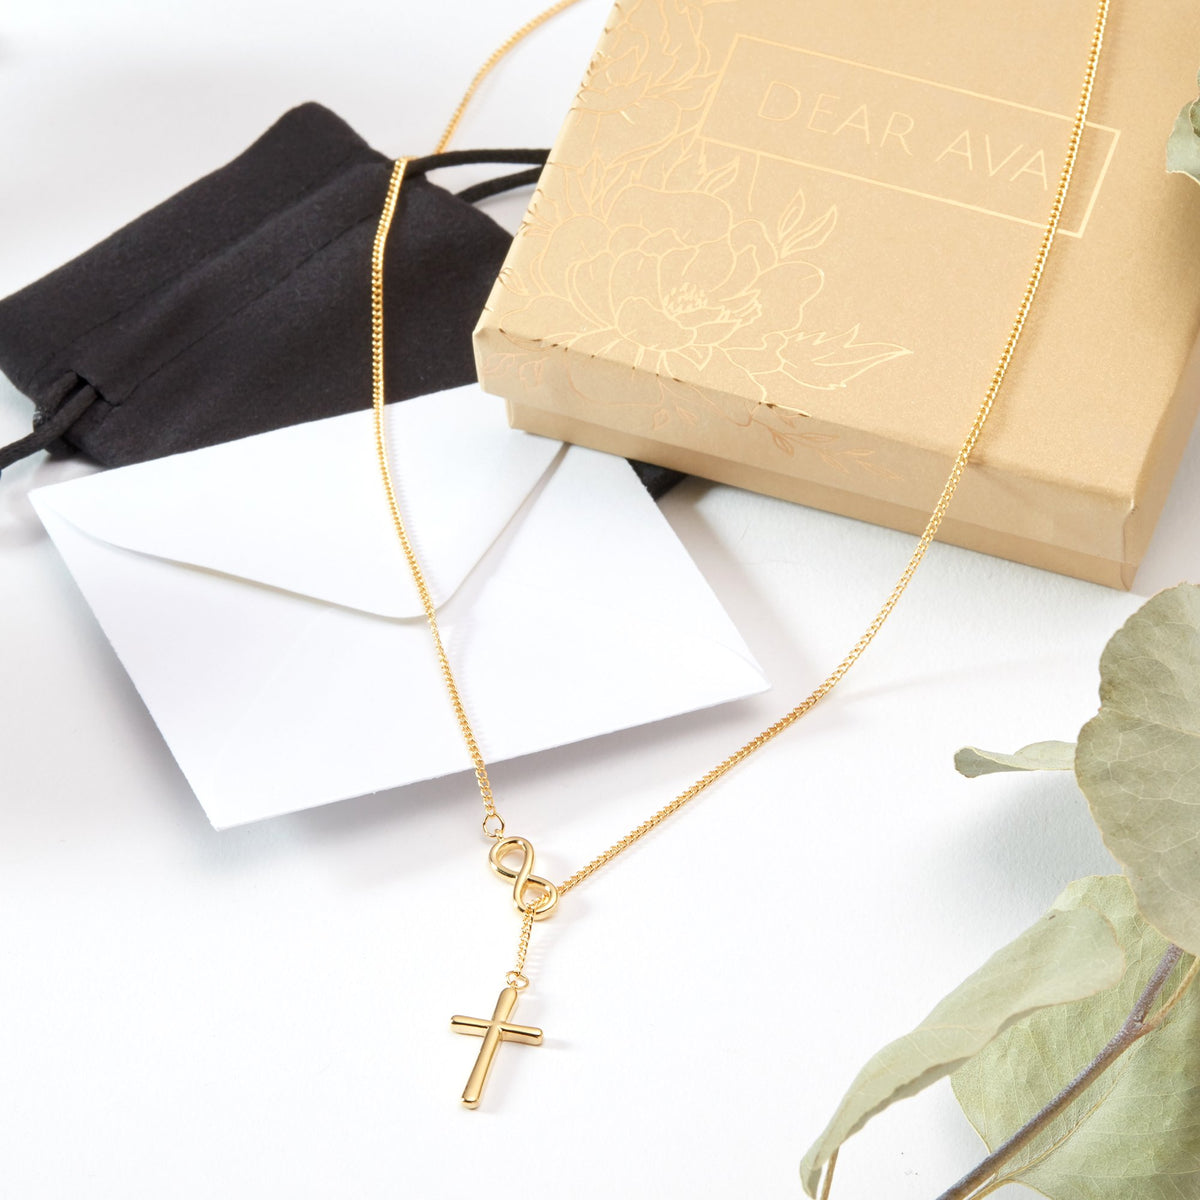 Easter Cross Necklace